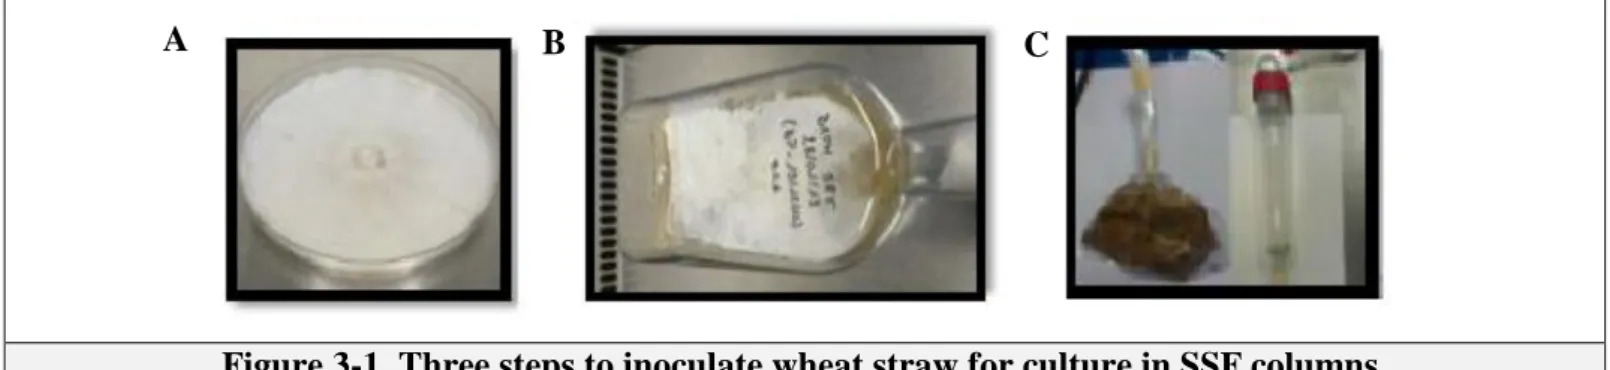 Figure 3-1. Three steps to inoculate wheat straw for culture in SSF columns. 